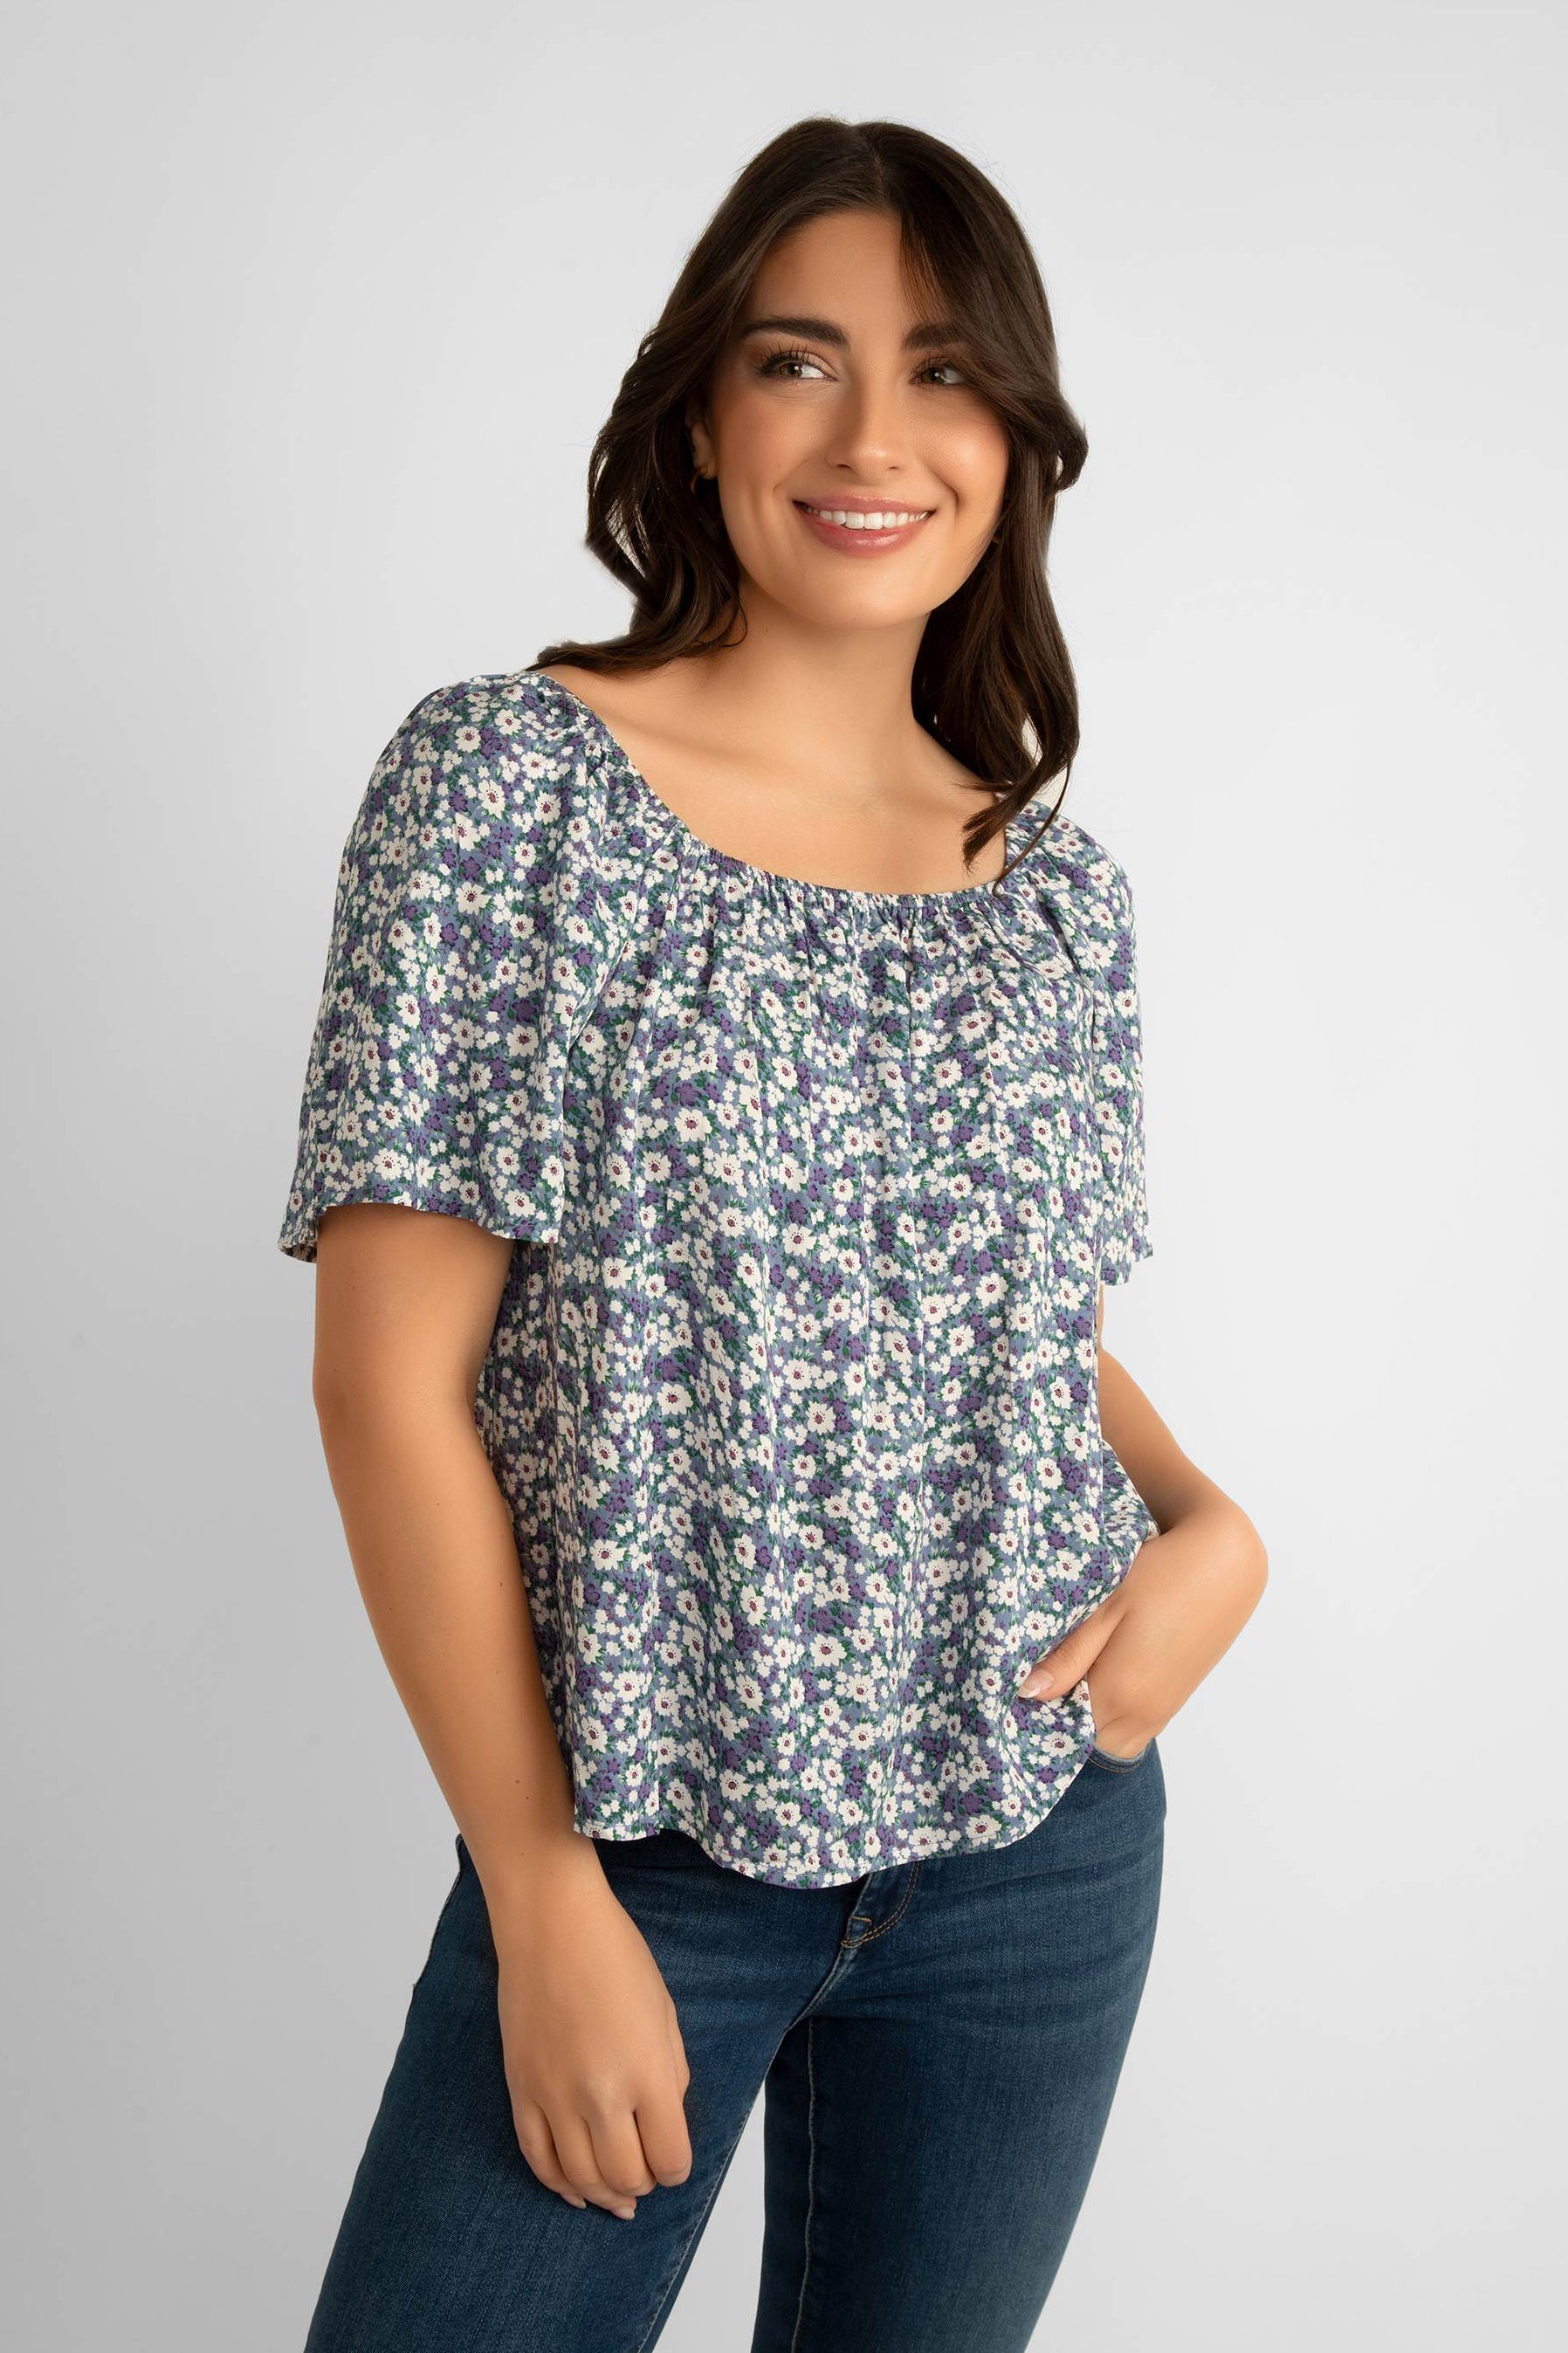 Pink Martini (TO-230511) Clarice Top - Short cap sleeves, elastic neckline and loose & relaxed fit in blue & white floral print